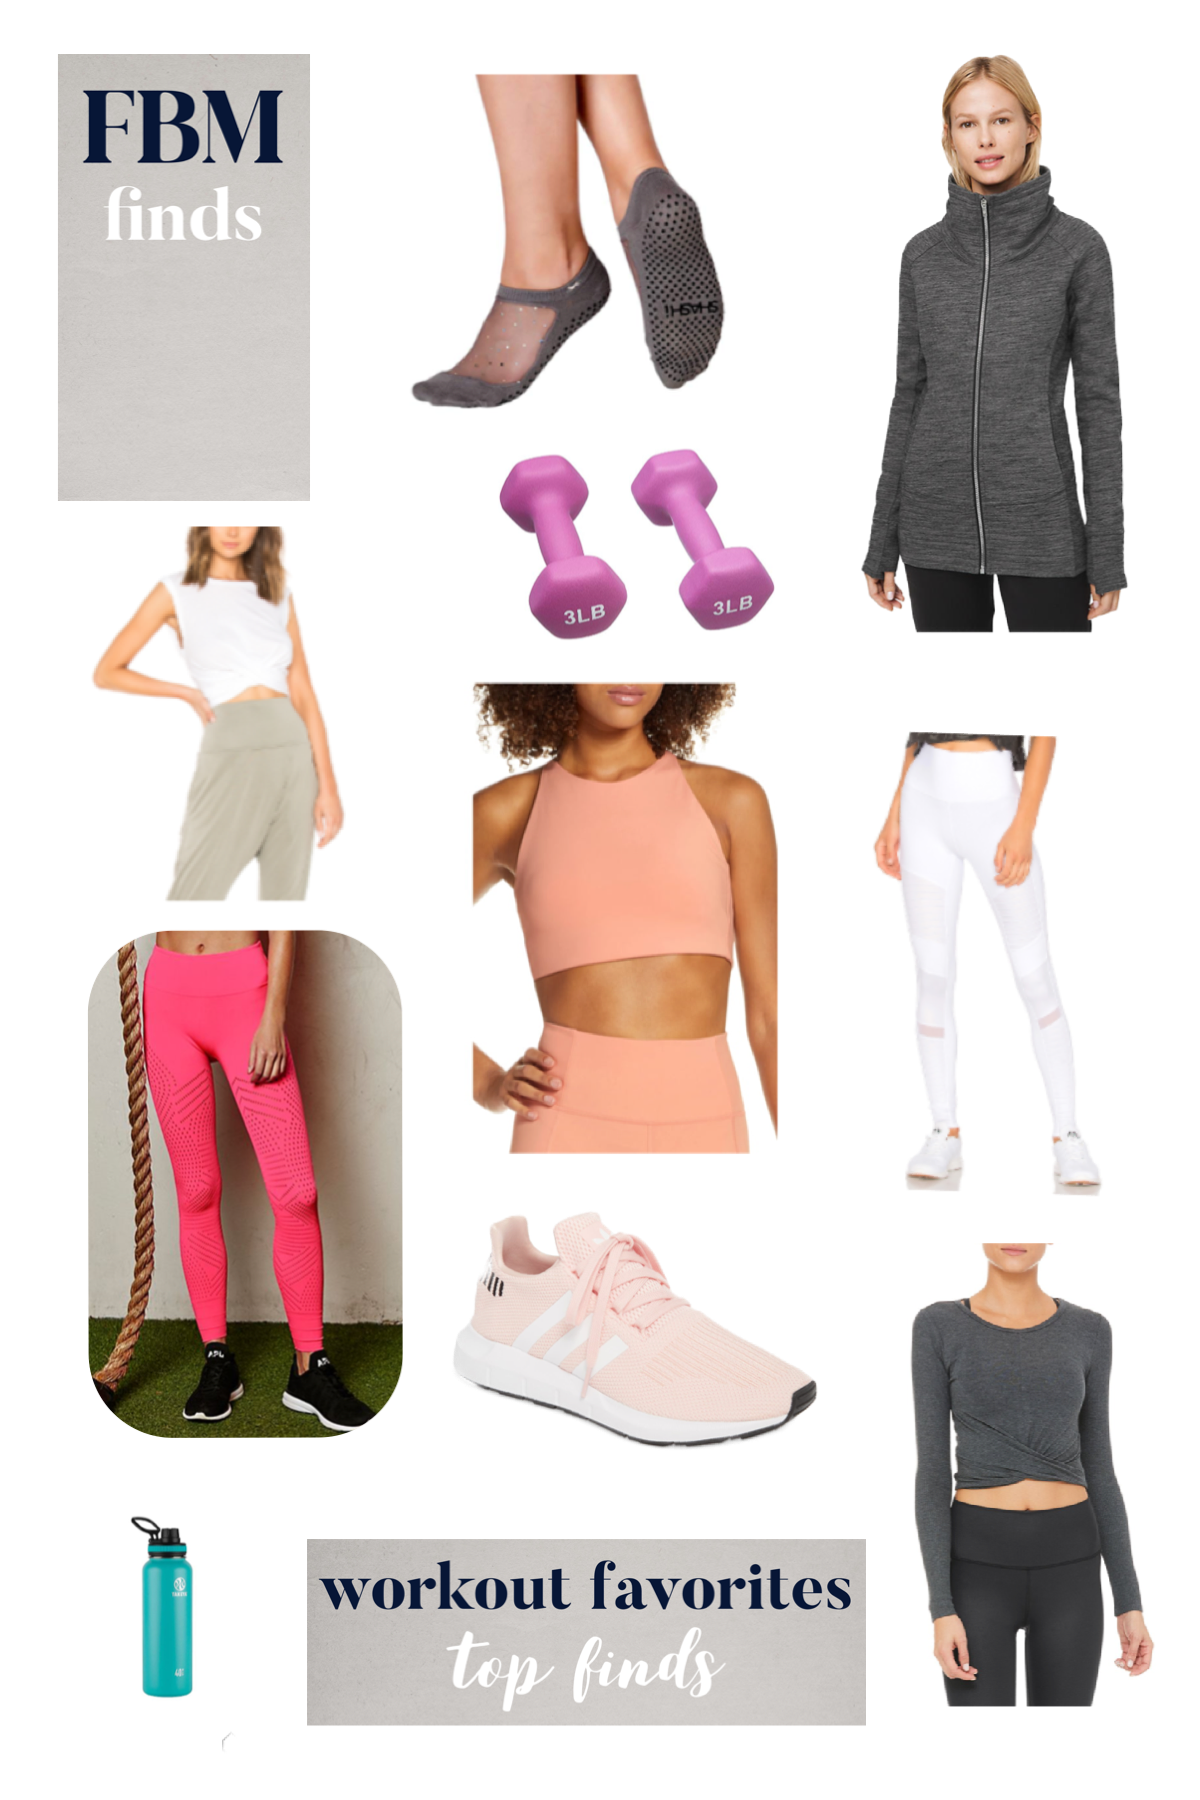 Fitness favorites / free people active wear / best workout styles